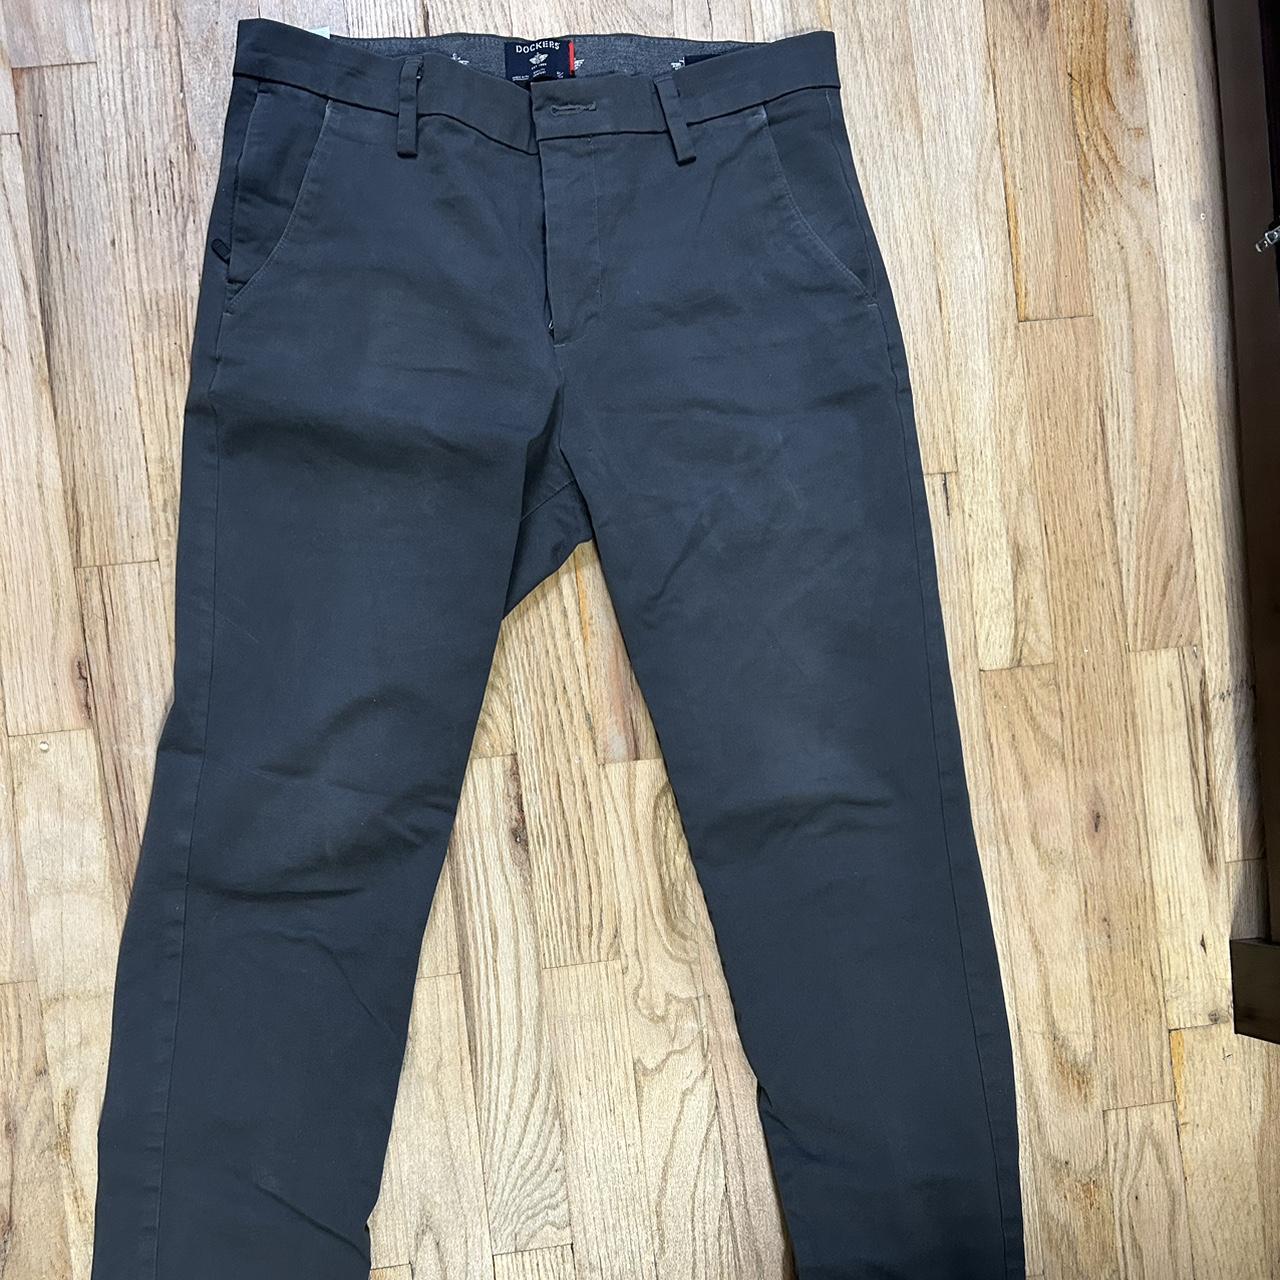 Dockers grey pants - manufactured by Levi’s 100%... - Depop